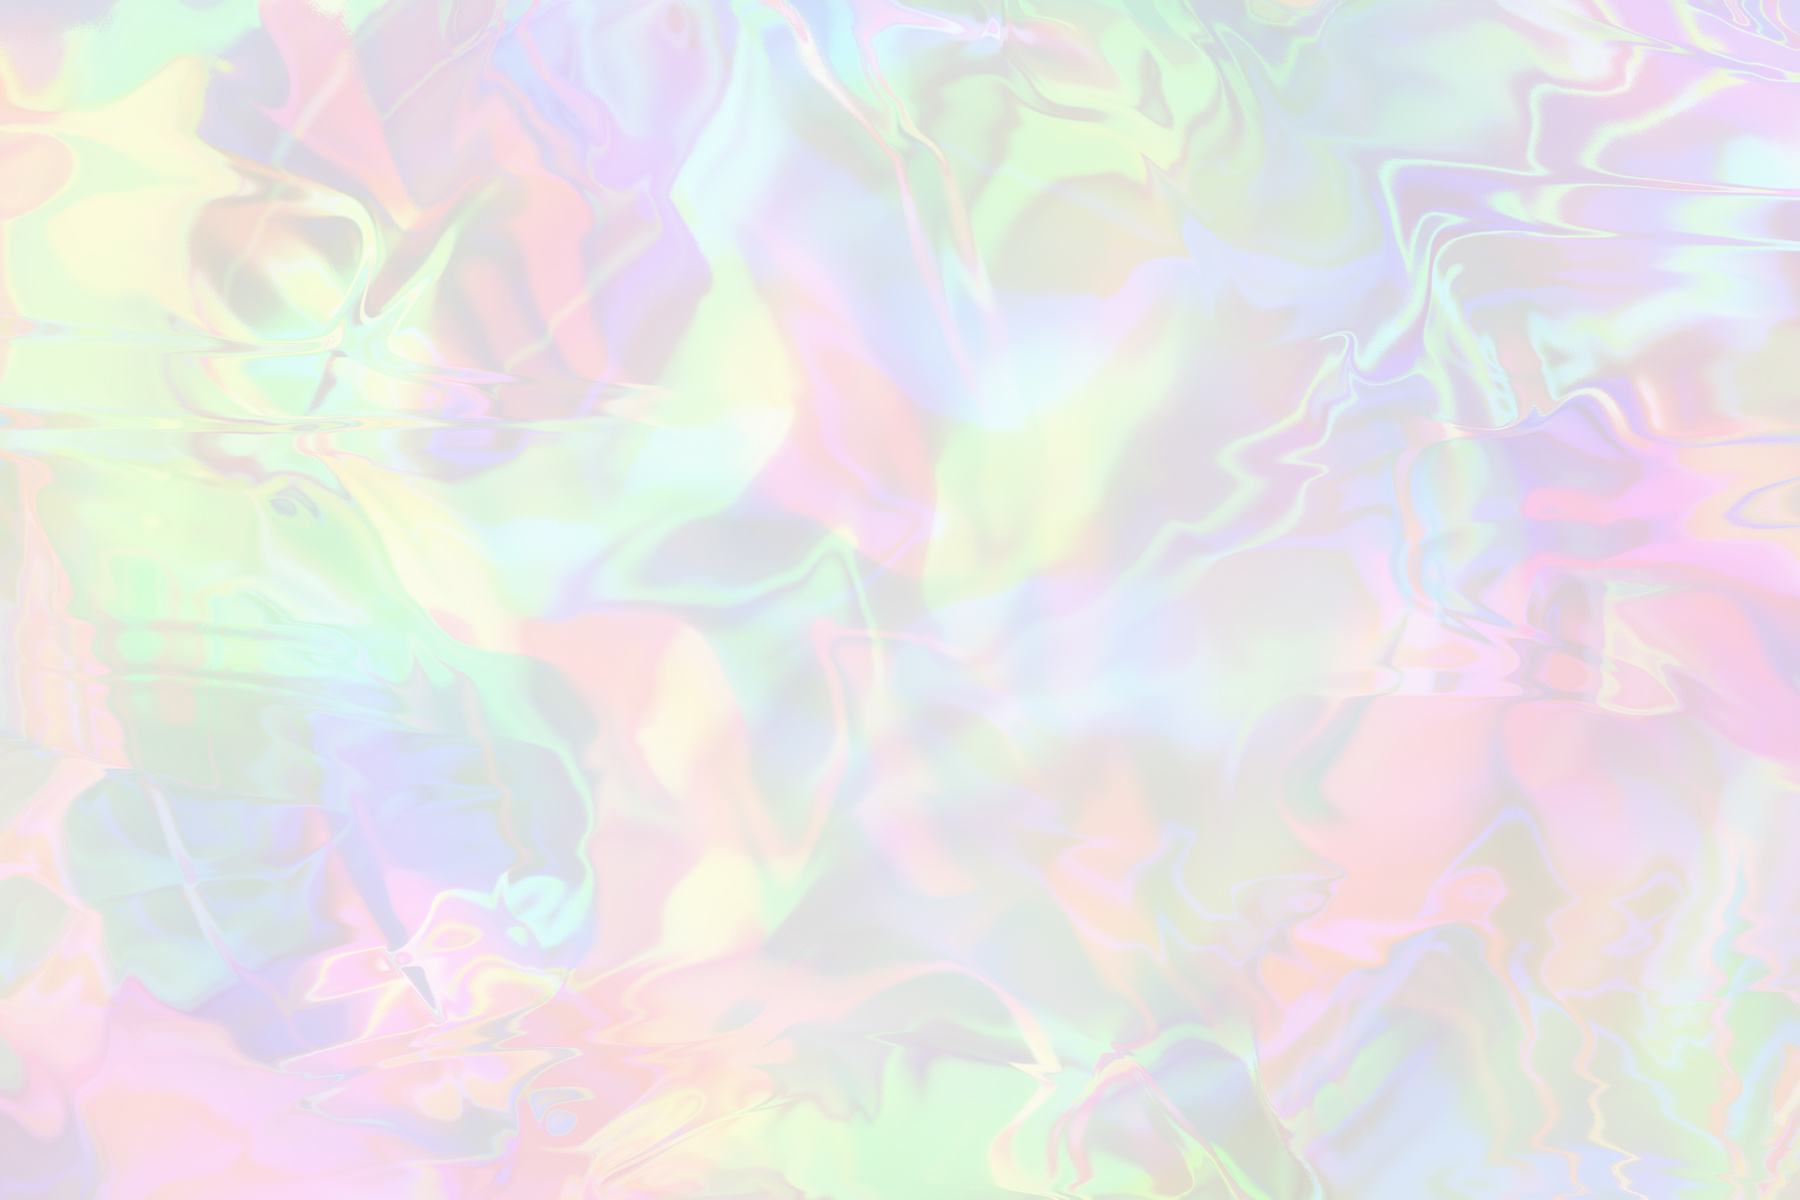 Holographic foil as abstract background